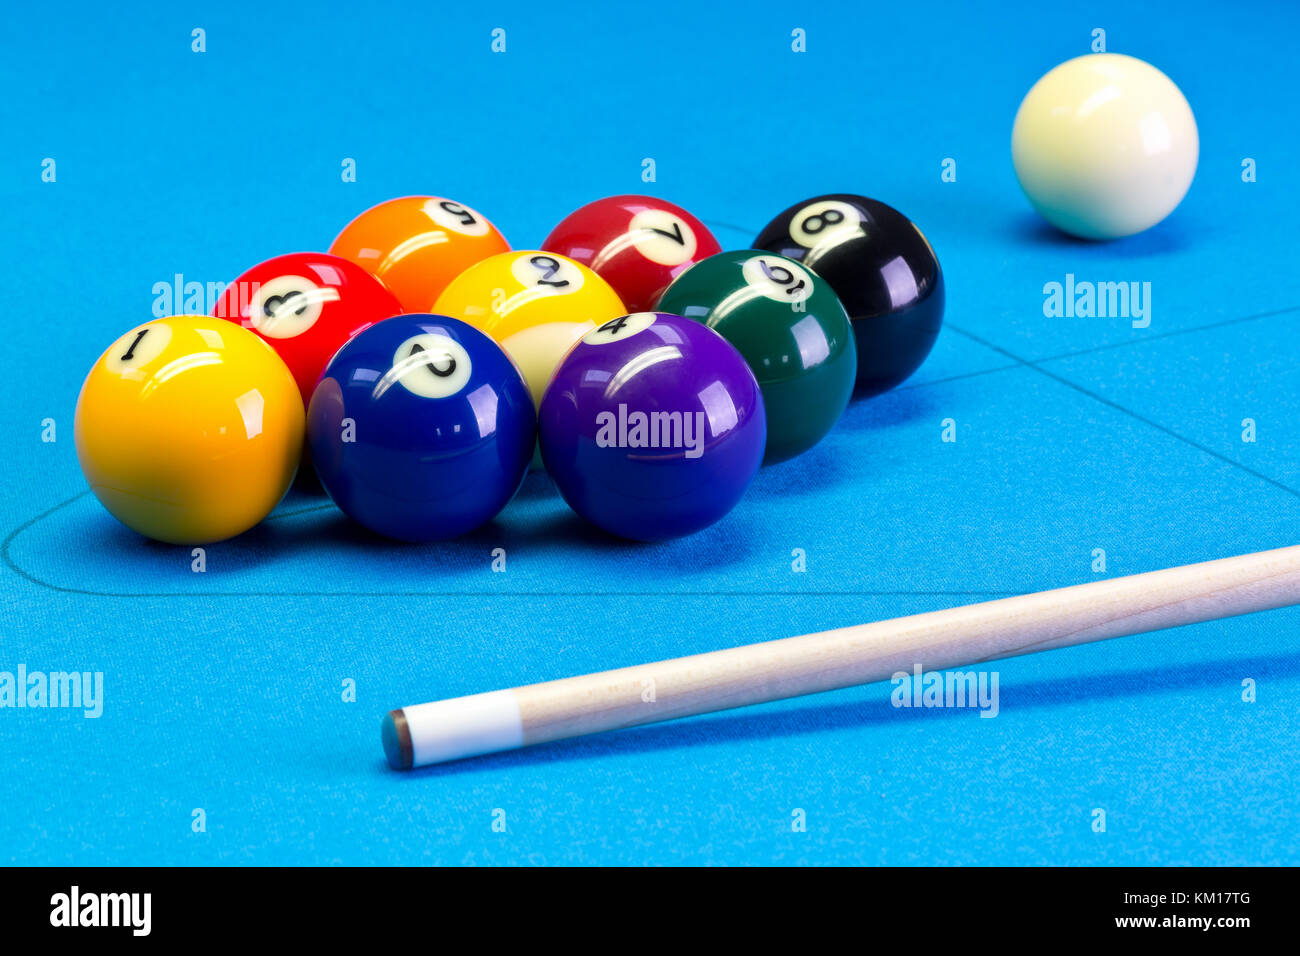 Billiard pool game nine ball with nineball balls set up with cue on  billiard table with blue cloth Stock Photo - Alamy